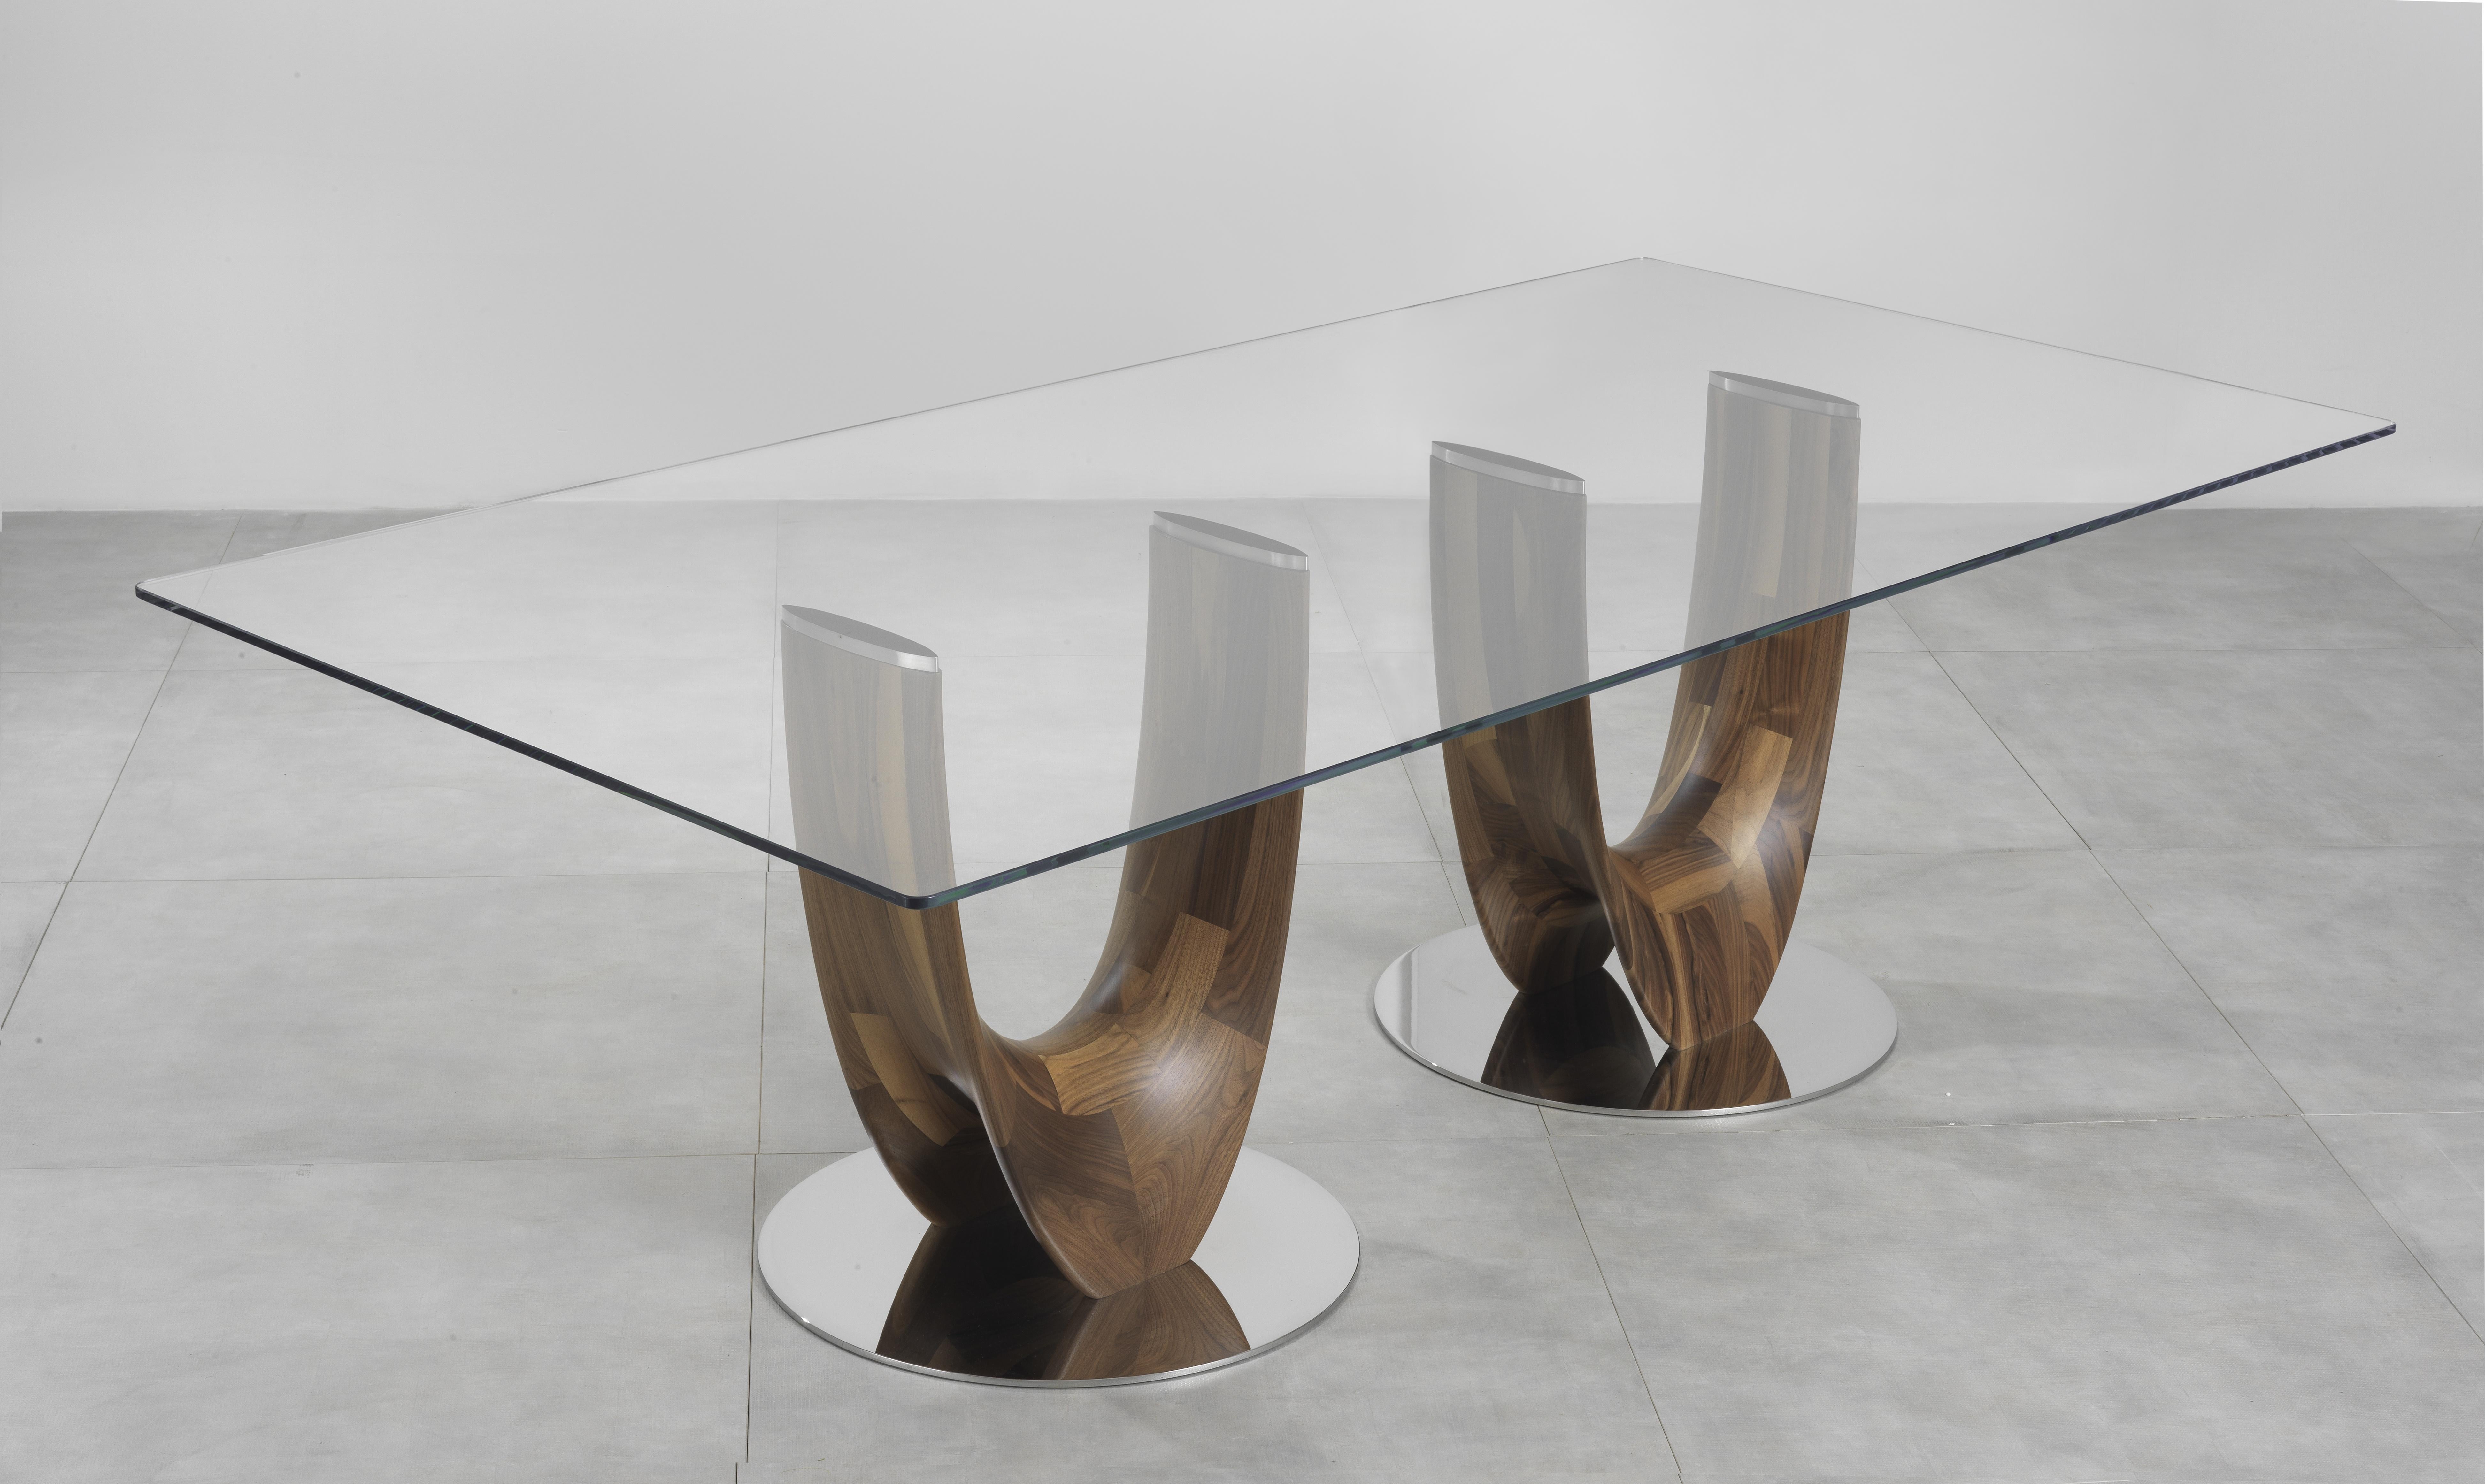 Dining table with base in solid canaletto walnut or ash. Bottom plate in chrome-plated metal. Top in tempered clear or transparent bronze glass (10 or 12 mm th.) with electro welded supports. 

Stefano Bigi studied art in his hometown in France. He